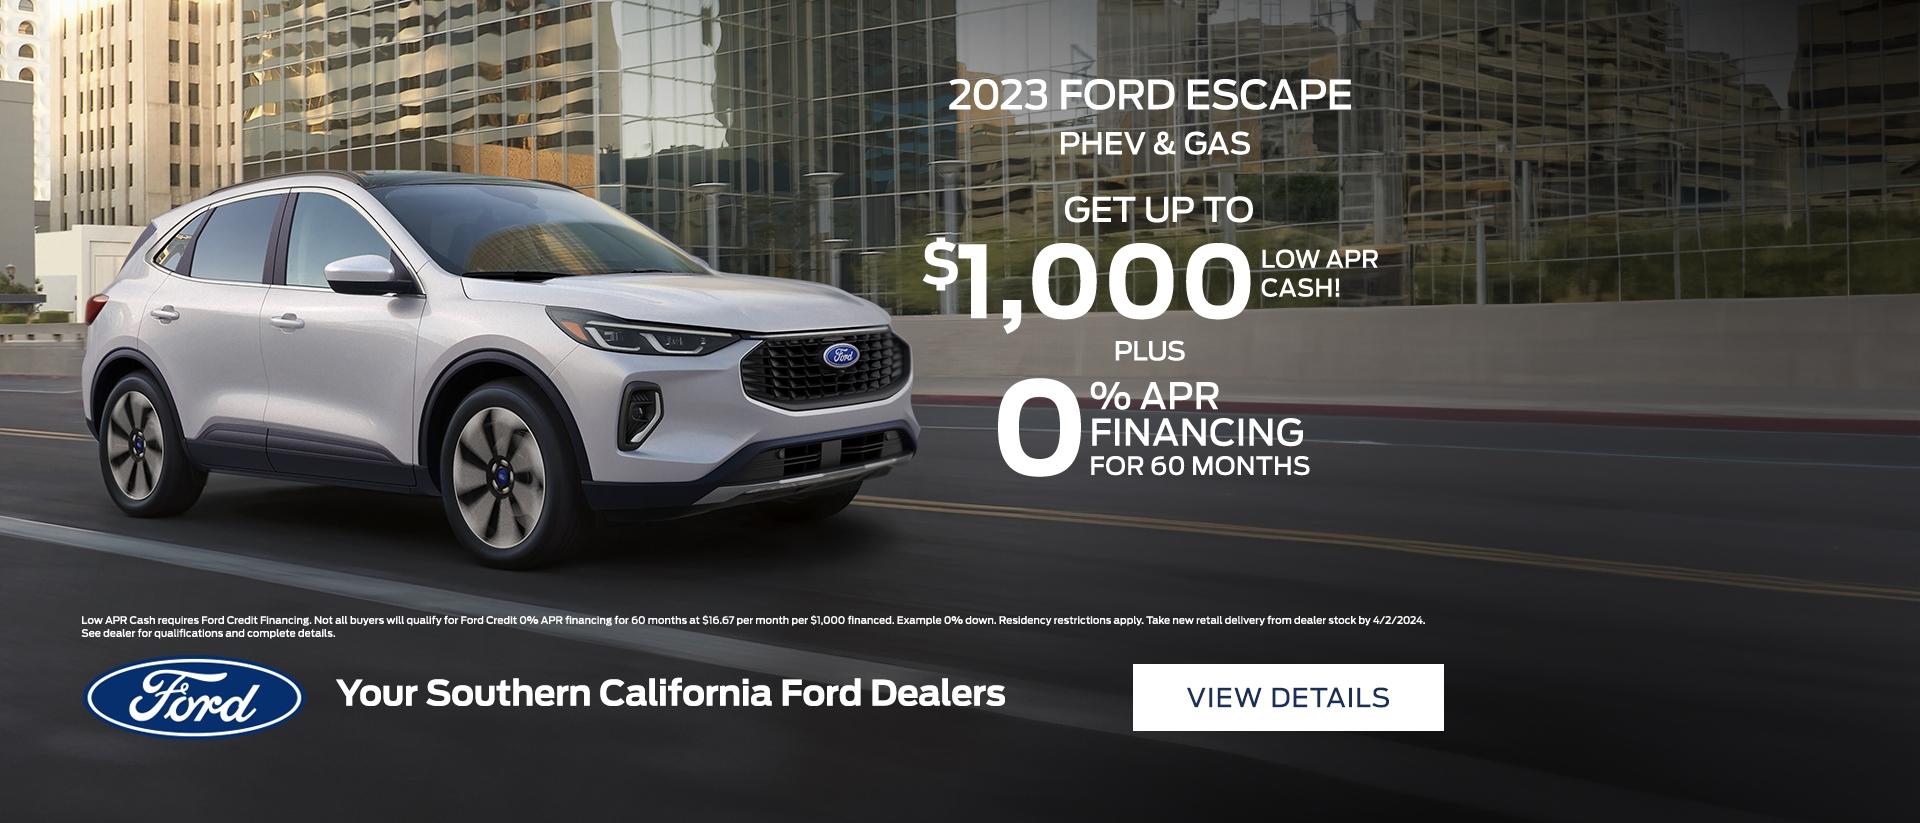 2023 Ford Escape Purchase Offer | Southern California Ford Dealers